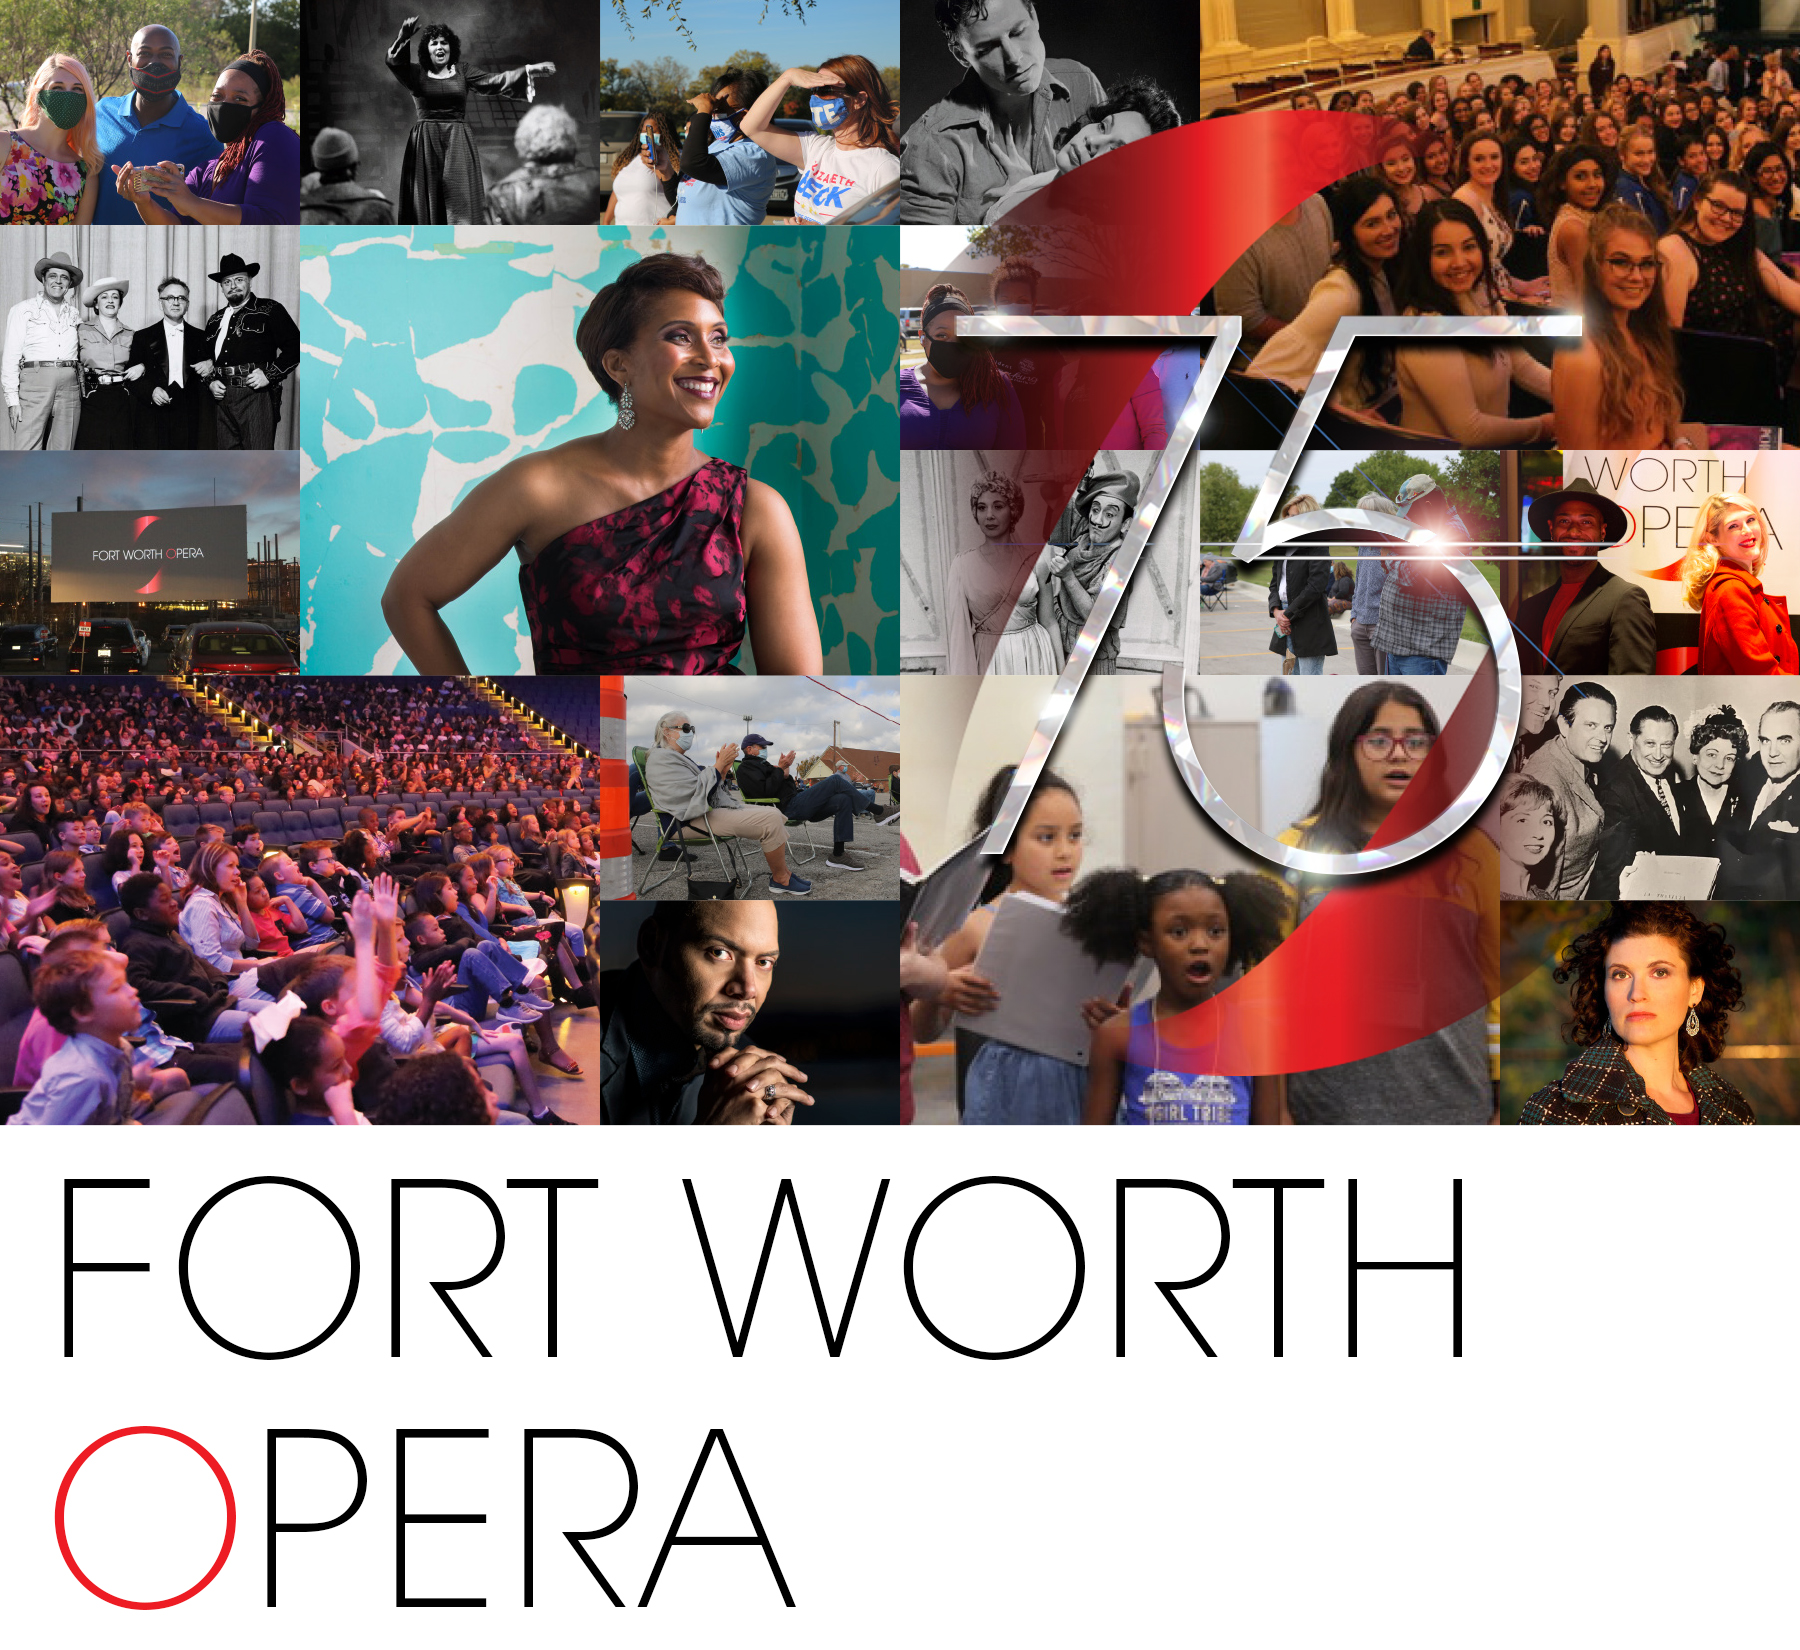 Fort Worth Opera Celebrates 75 Years of Performances in North Texas During the Company's Historic 2021-2022 Season.